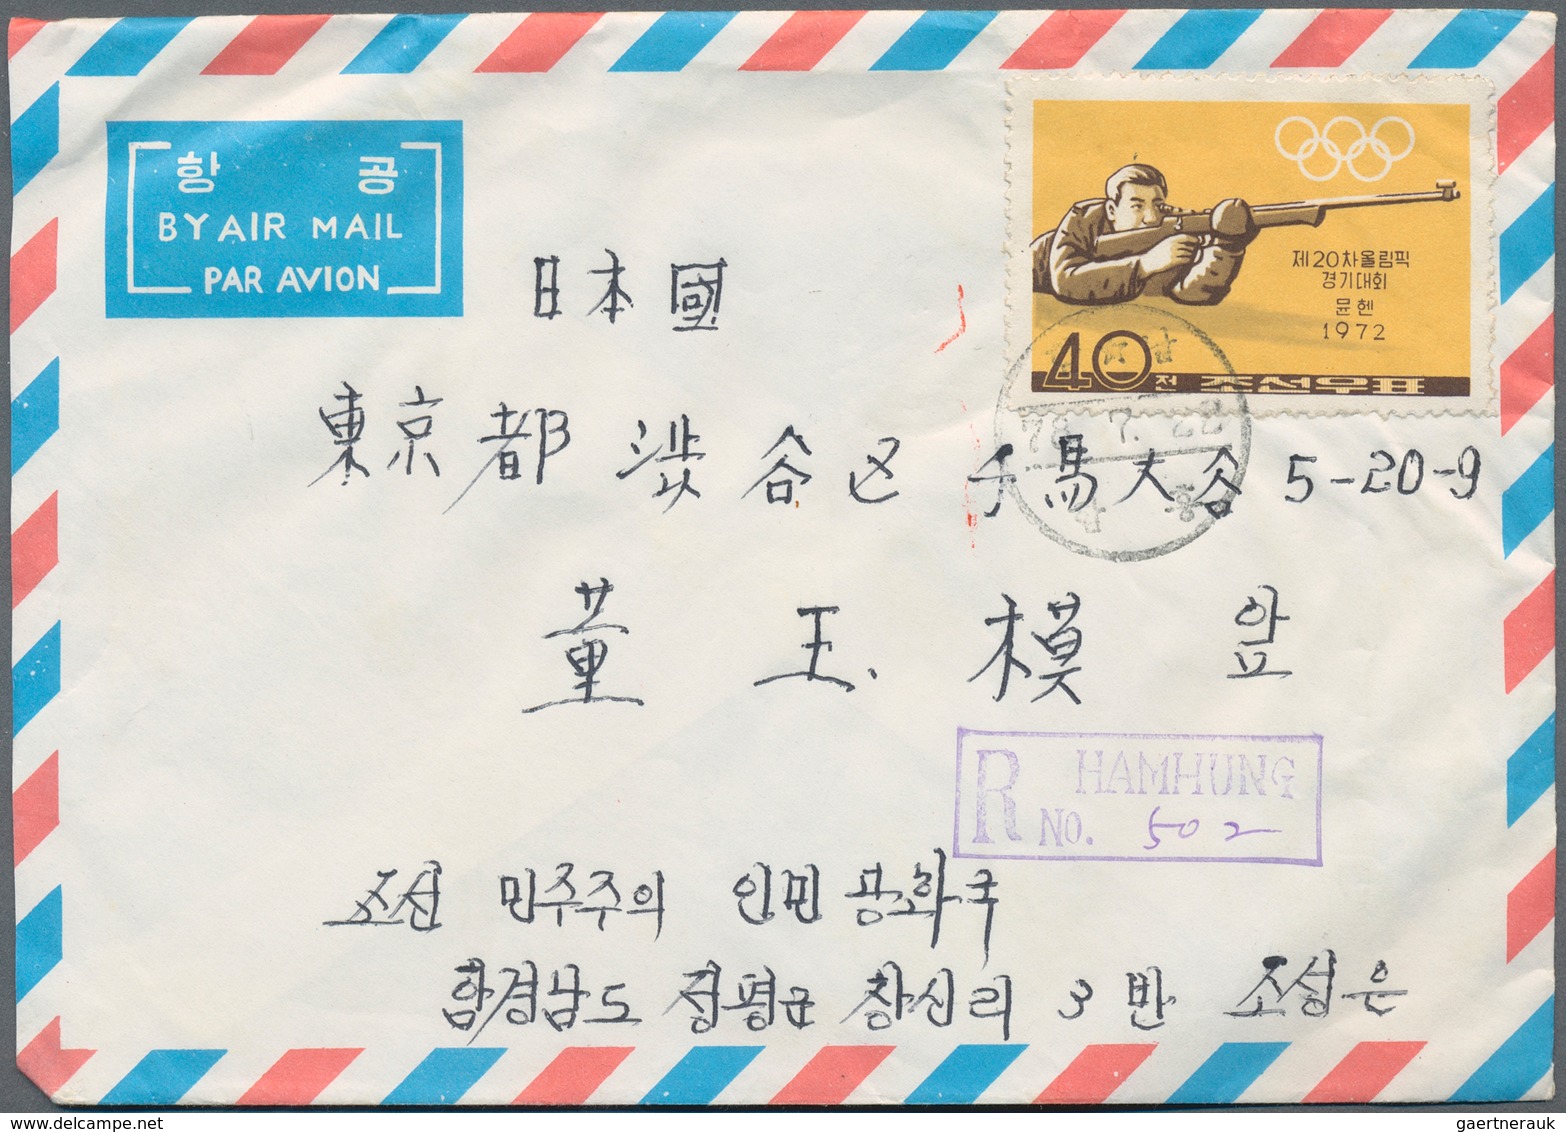 Korea-Nord: 1955/81, covers (13), used ppc (1), used stationery (4) mostly from a correspondence to